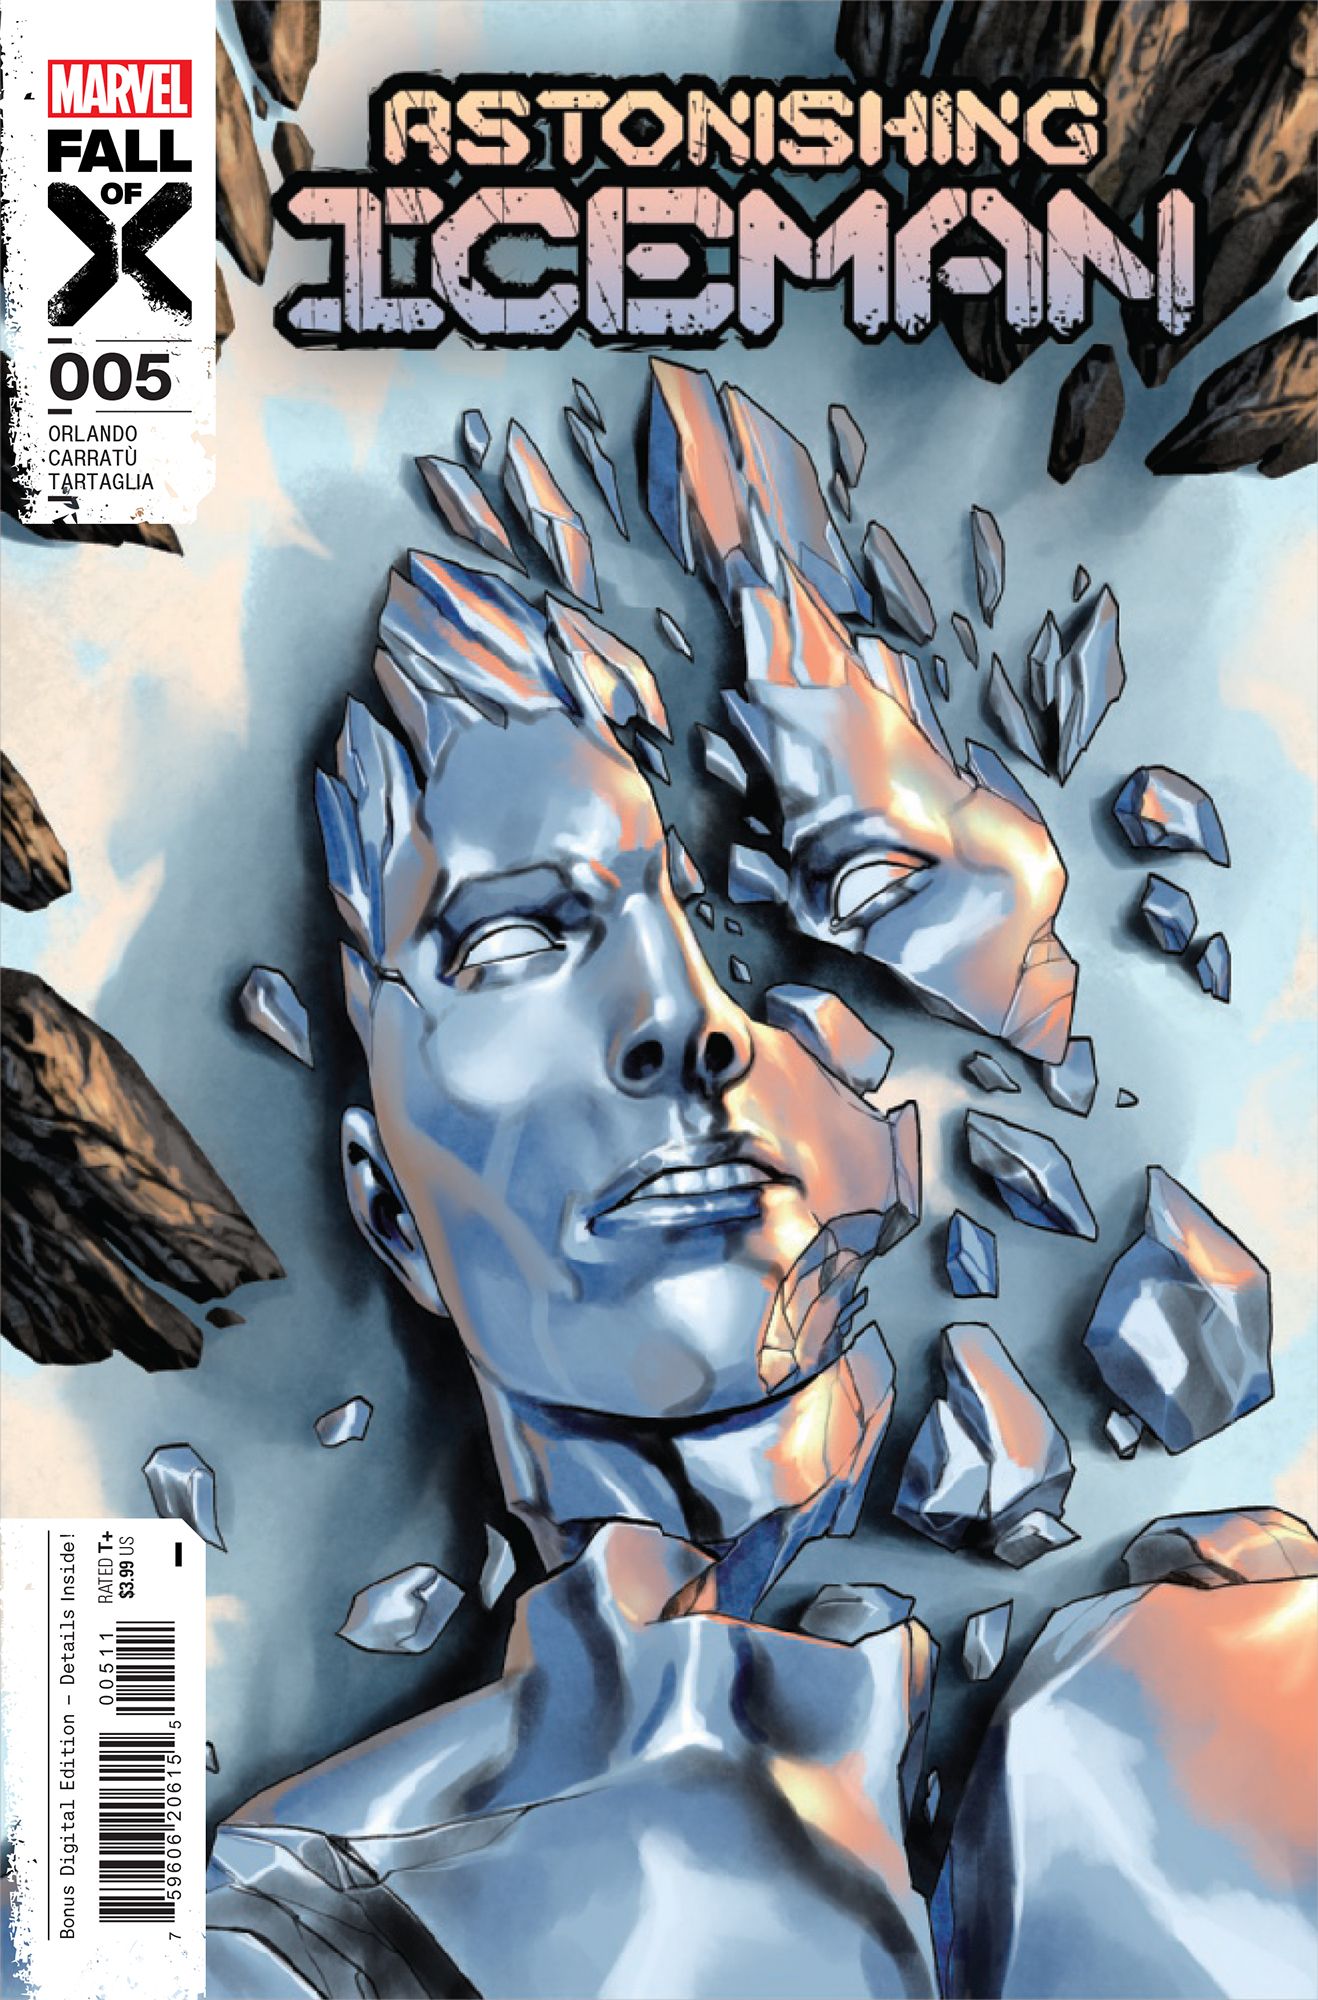 Astonishing Iceman #5 Cover by Jesus Saiz - Iceman's head and chest are on the ground, broken like glass